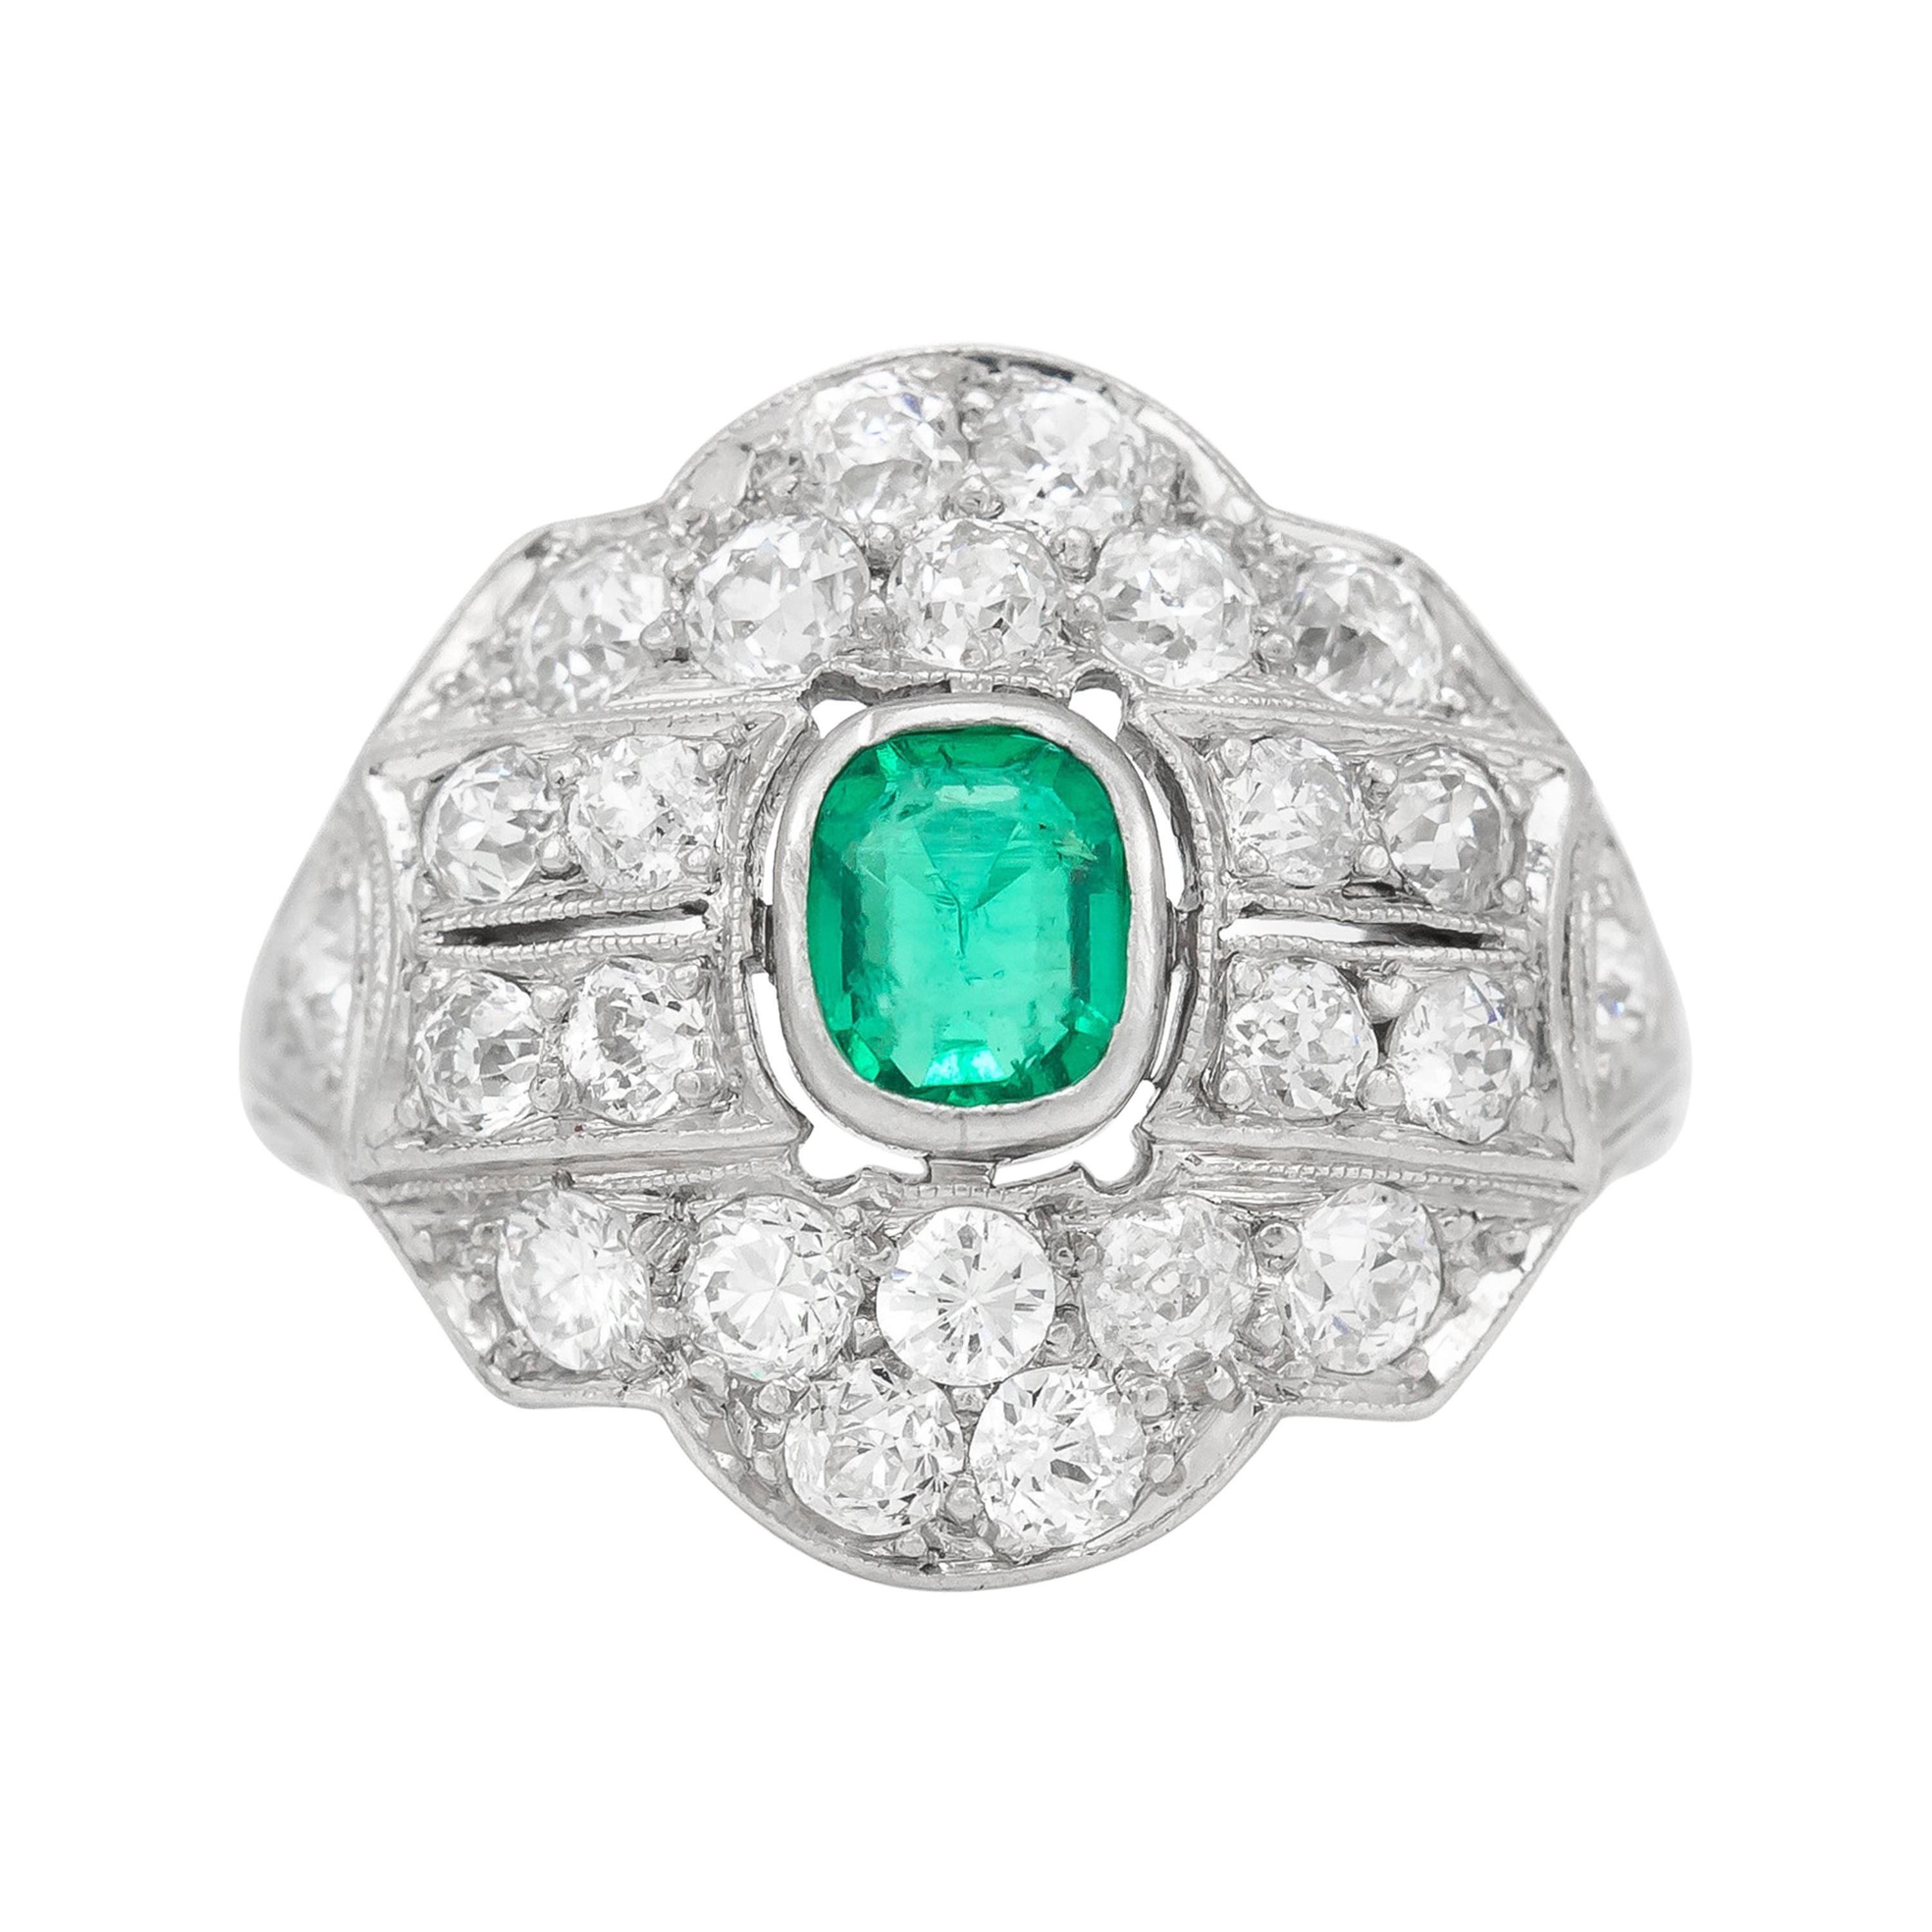 Sophia D. GIA Certified Platinum Ring with Emerald, Diamond, and ...